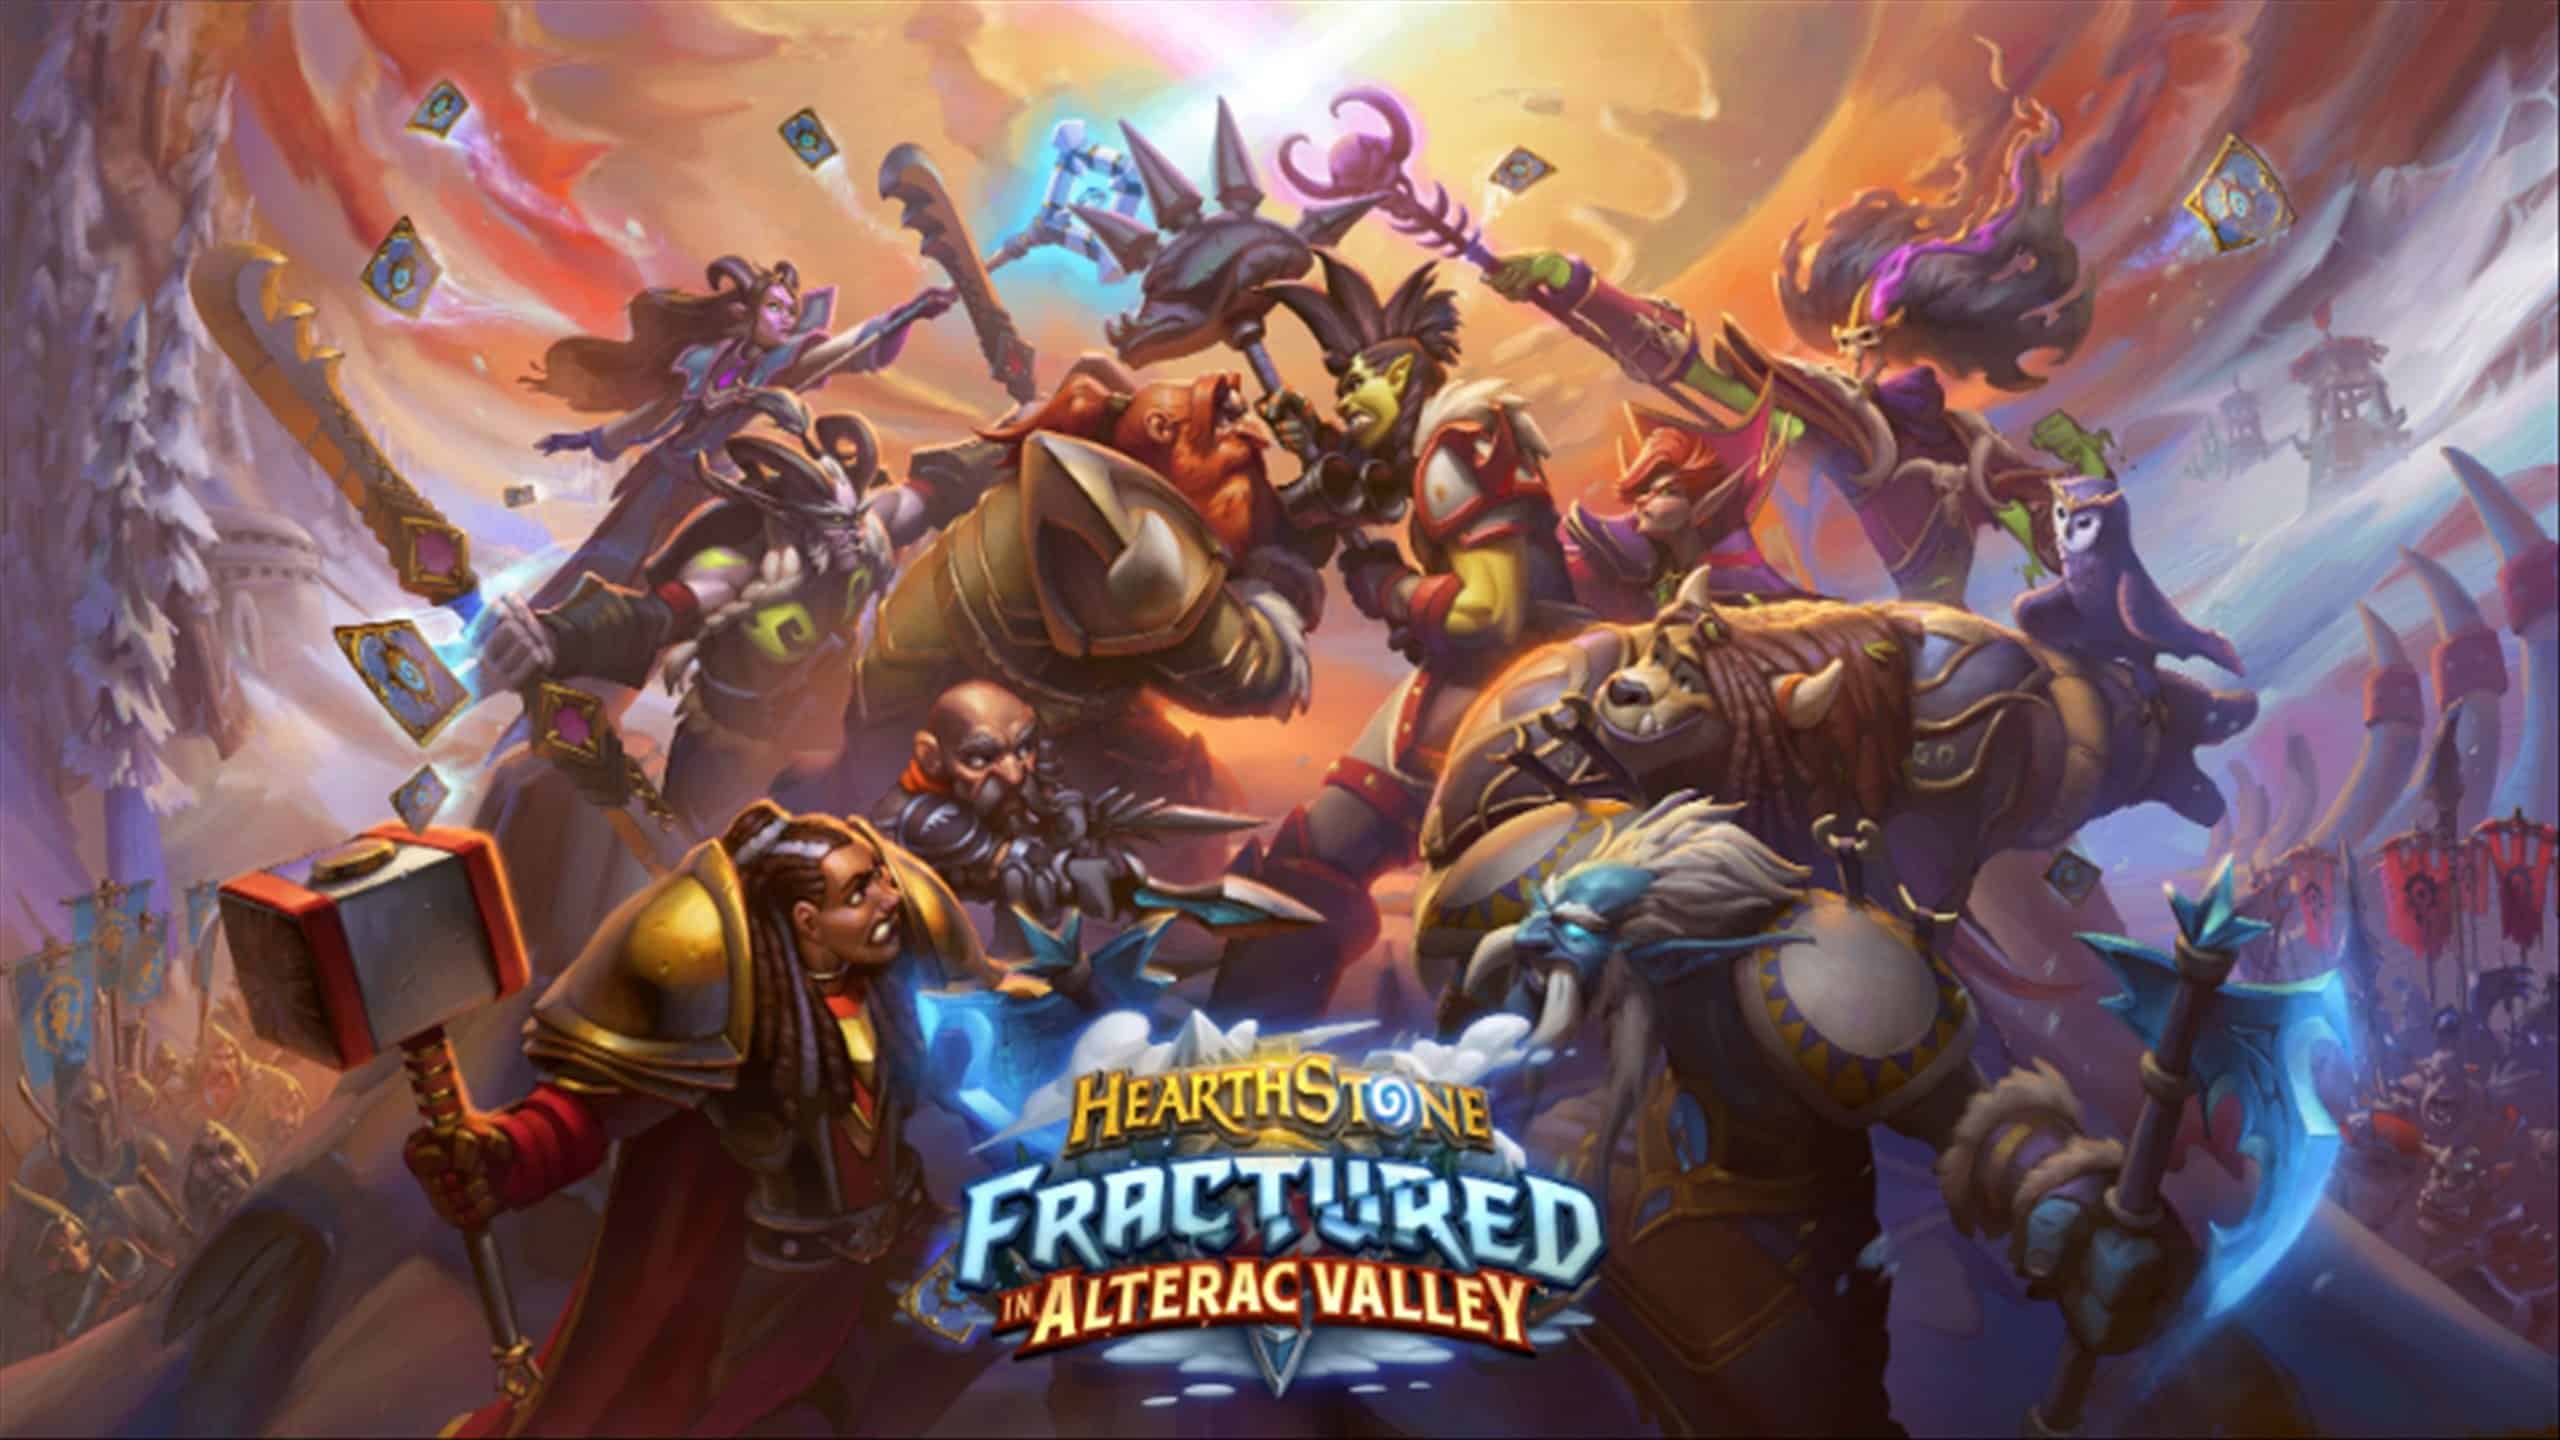 Hearthstone Fractured in Alterac Valley impressions